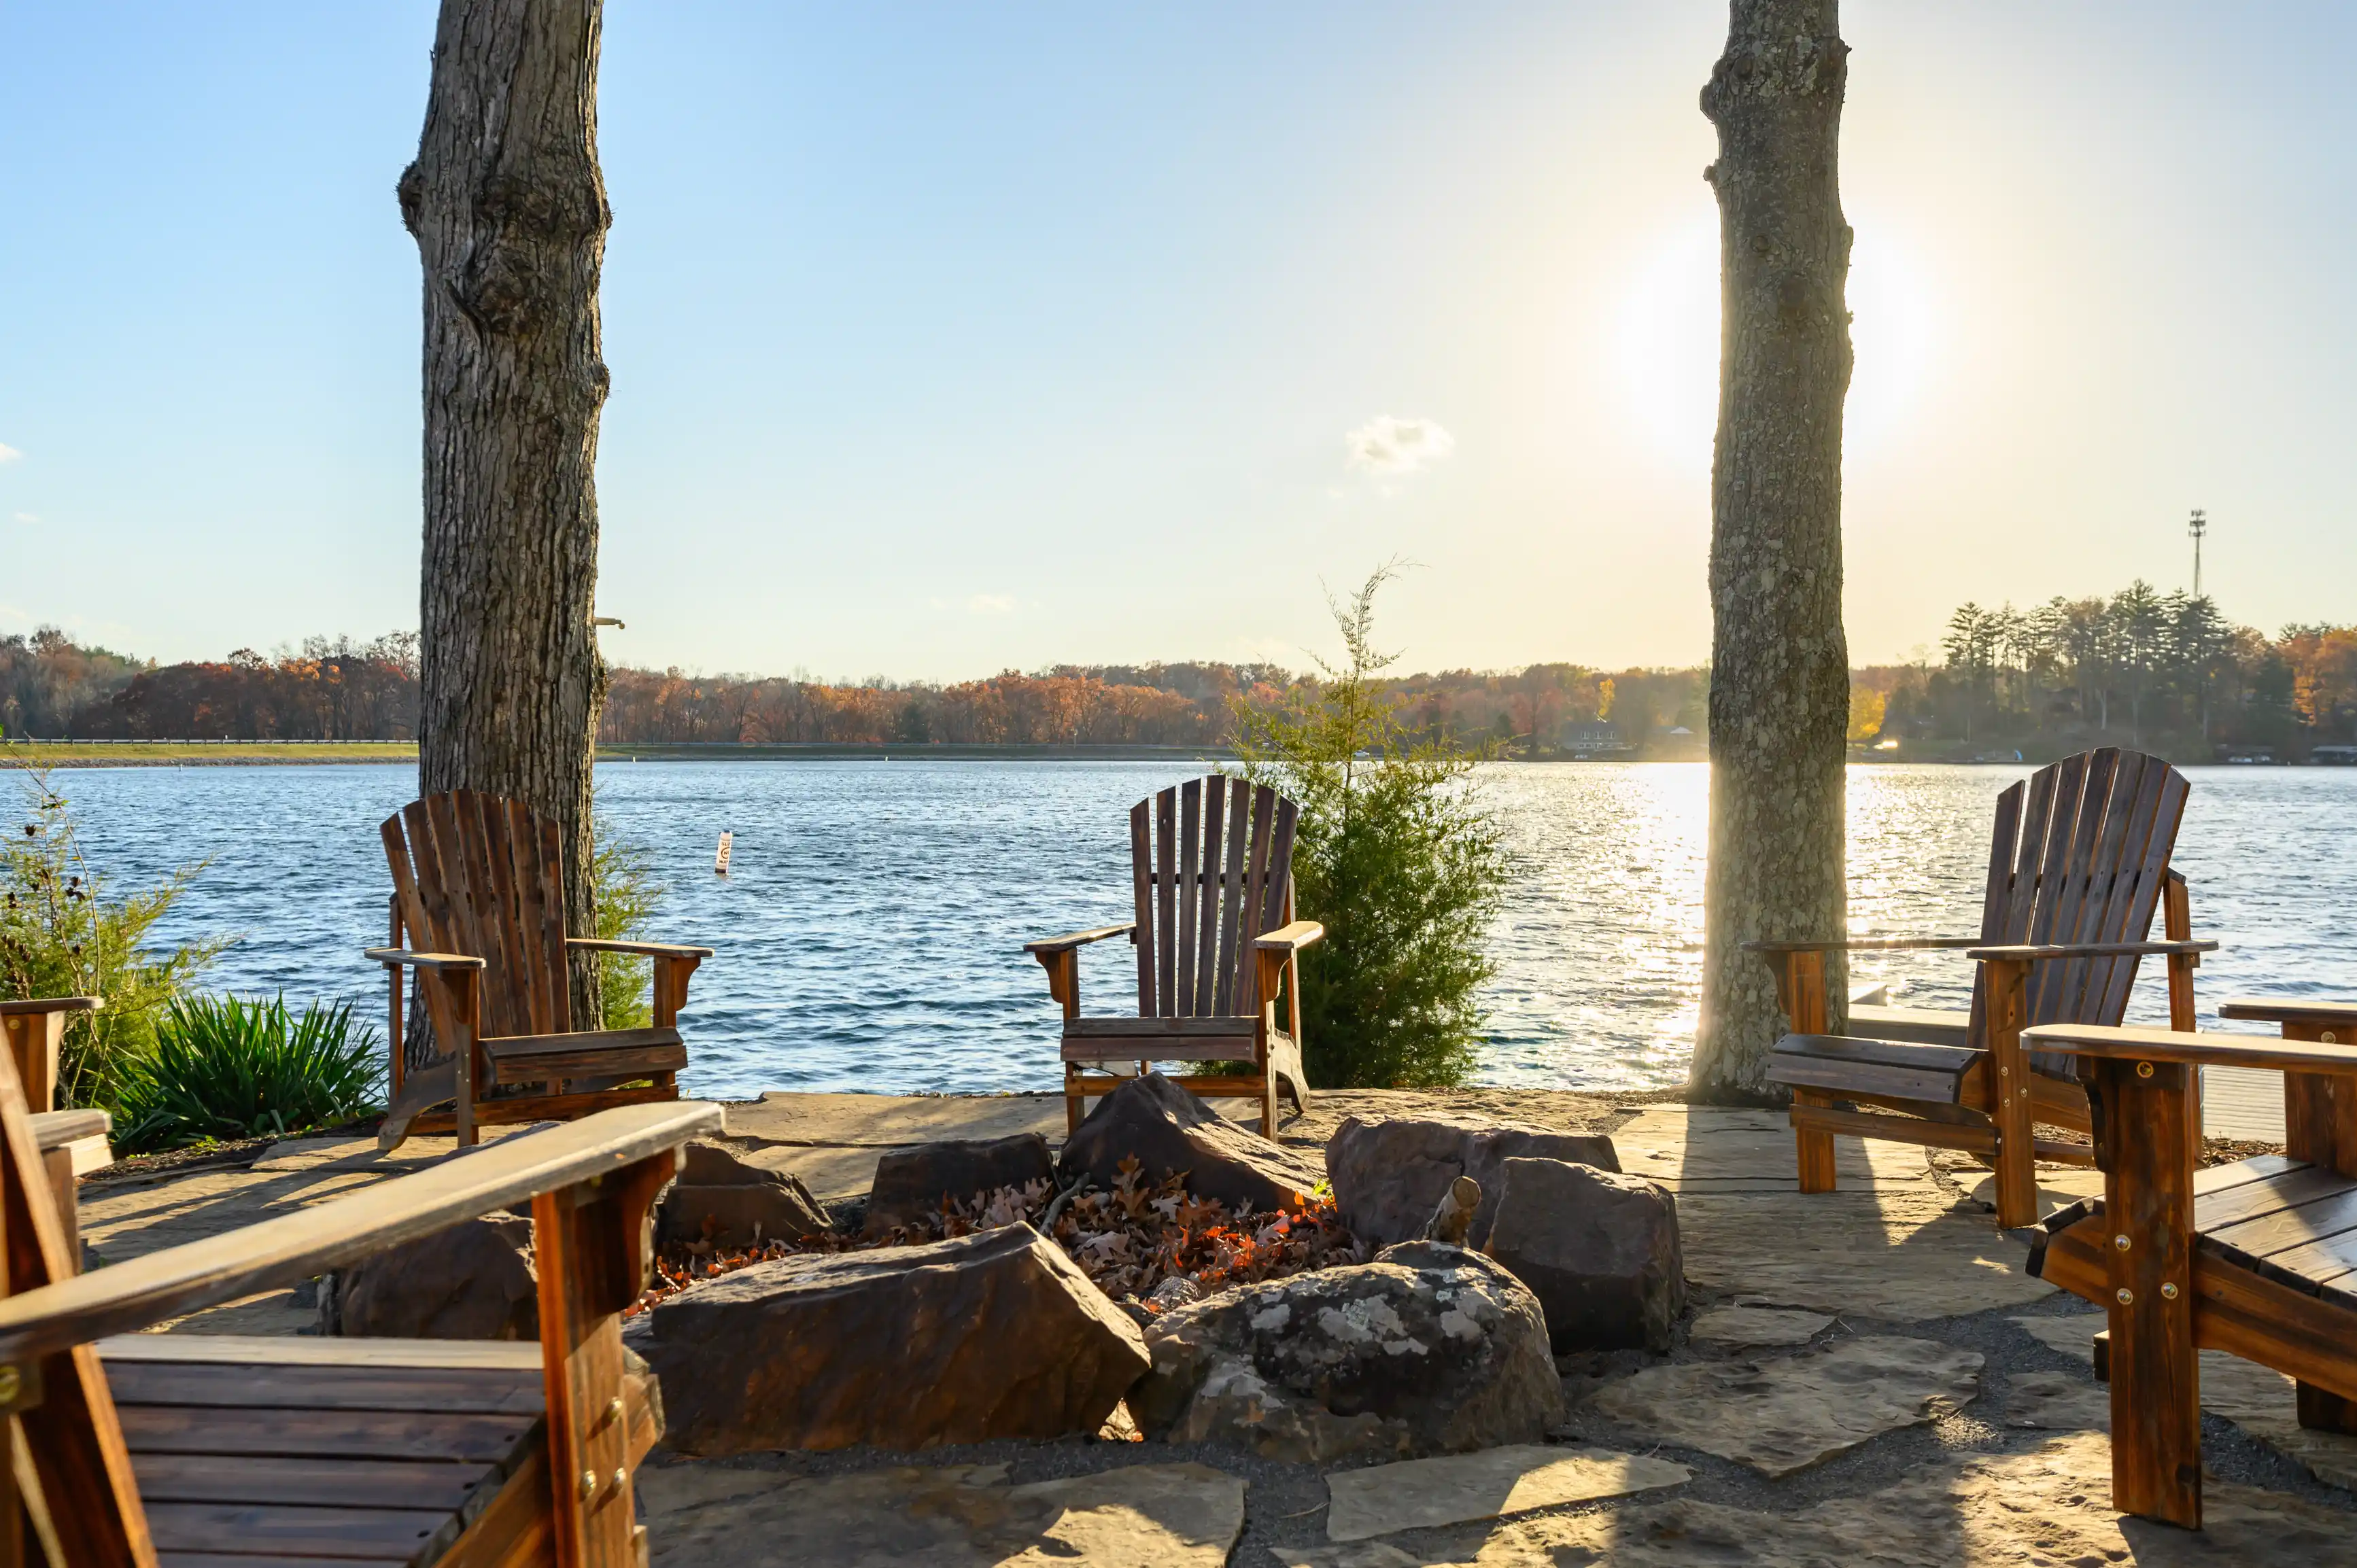 Two wooden Adirondack chairs facing a tranquil lake with a fire pit in the foreground, surrounded by rocks and fallen leaves on a sunny day.